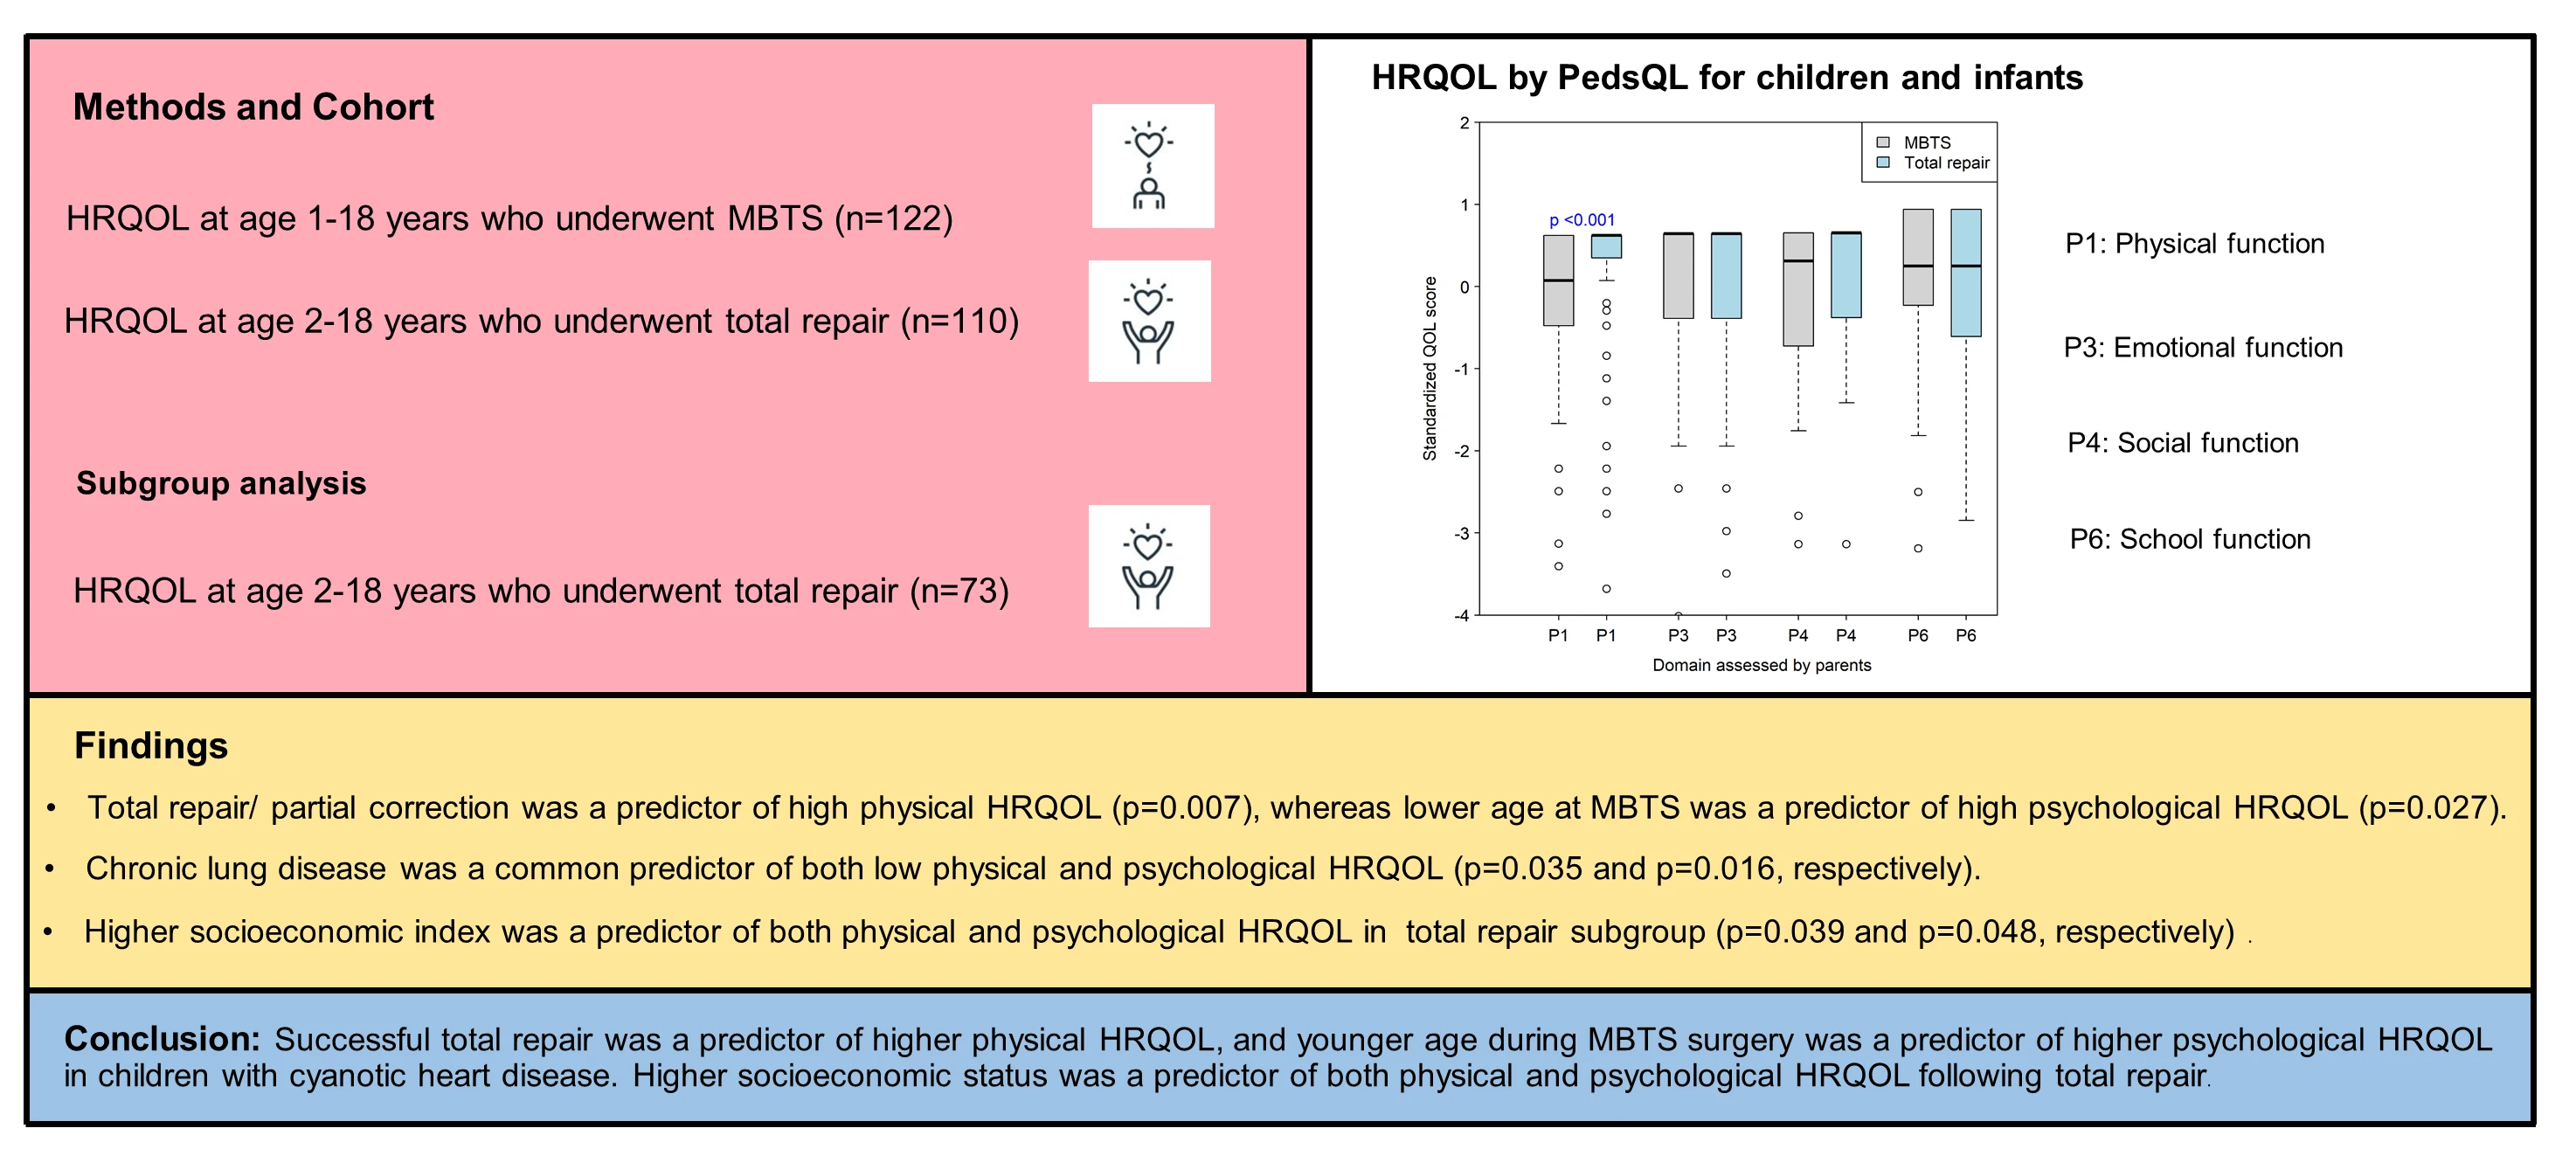 Predictors of Health-Related Quality of Life in Children with Cyanotic Heart Disease Who Underwent Palliative and Total Repair